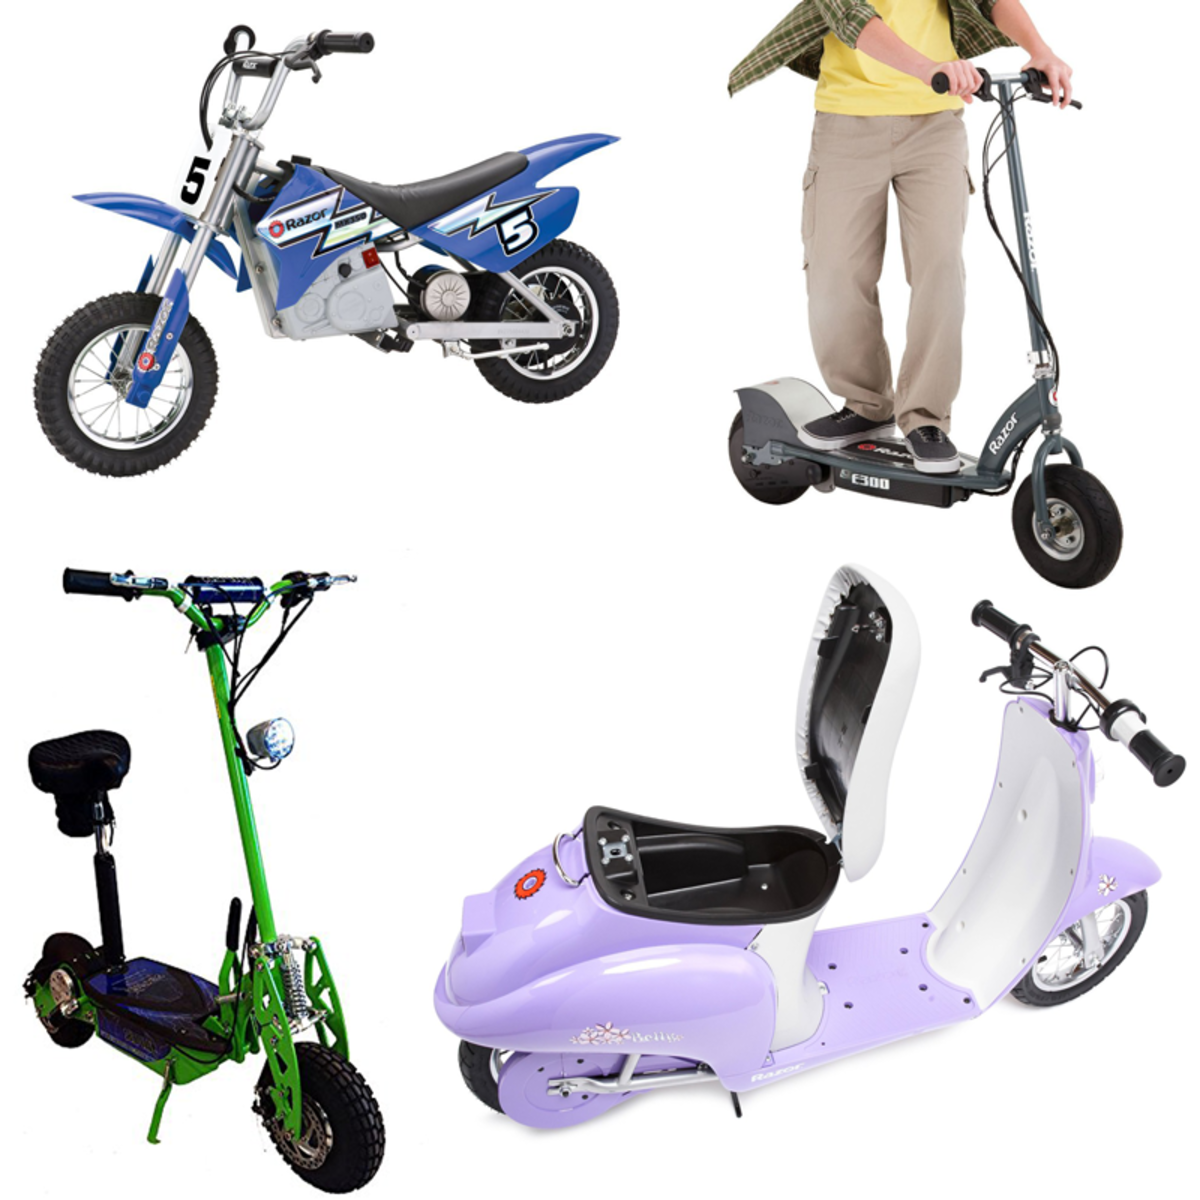 The 10 Best Electric Scooters for Kids | HubPages